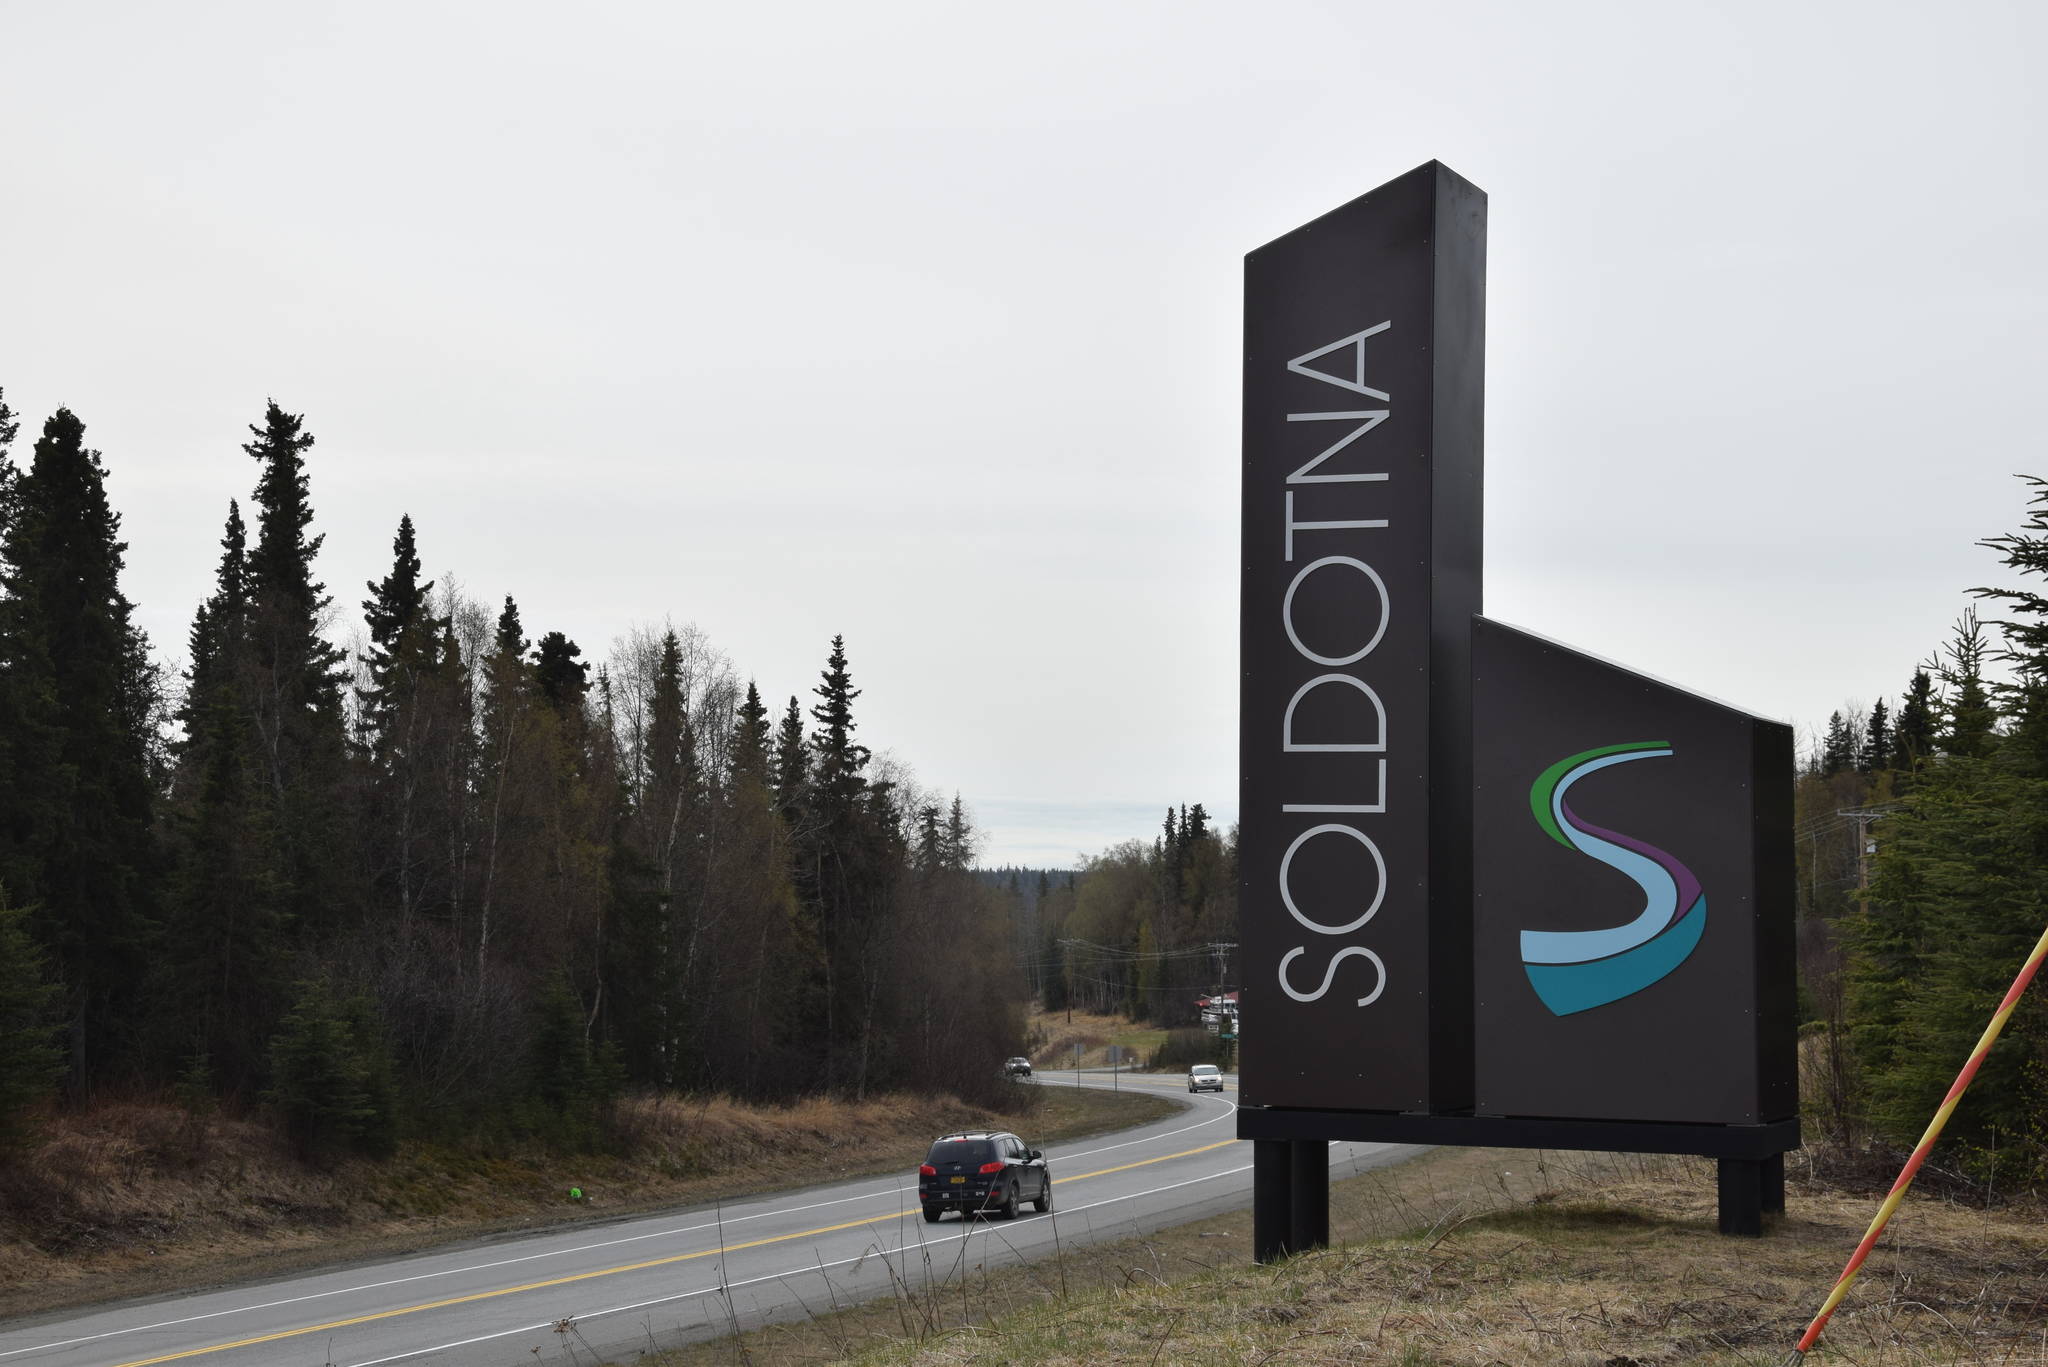 A new sign welcoming people to the City of Soldotna is photographed on May 1, 2019, in Soldotna, Alaska. (Photo by Brian Mazurek/Peninsula Clarion)